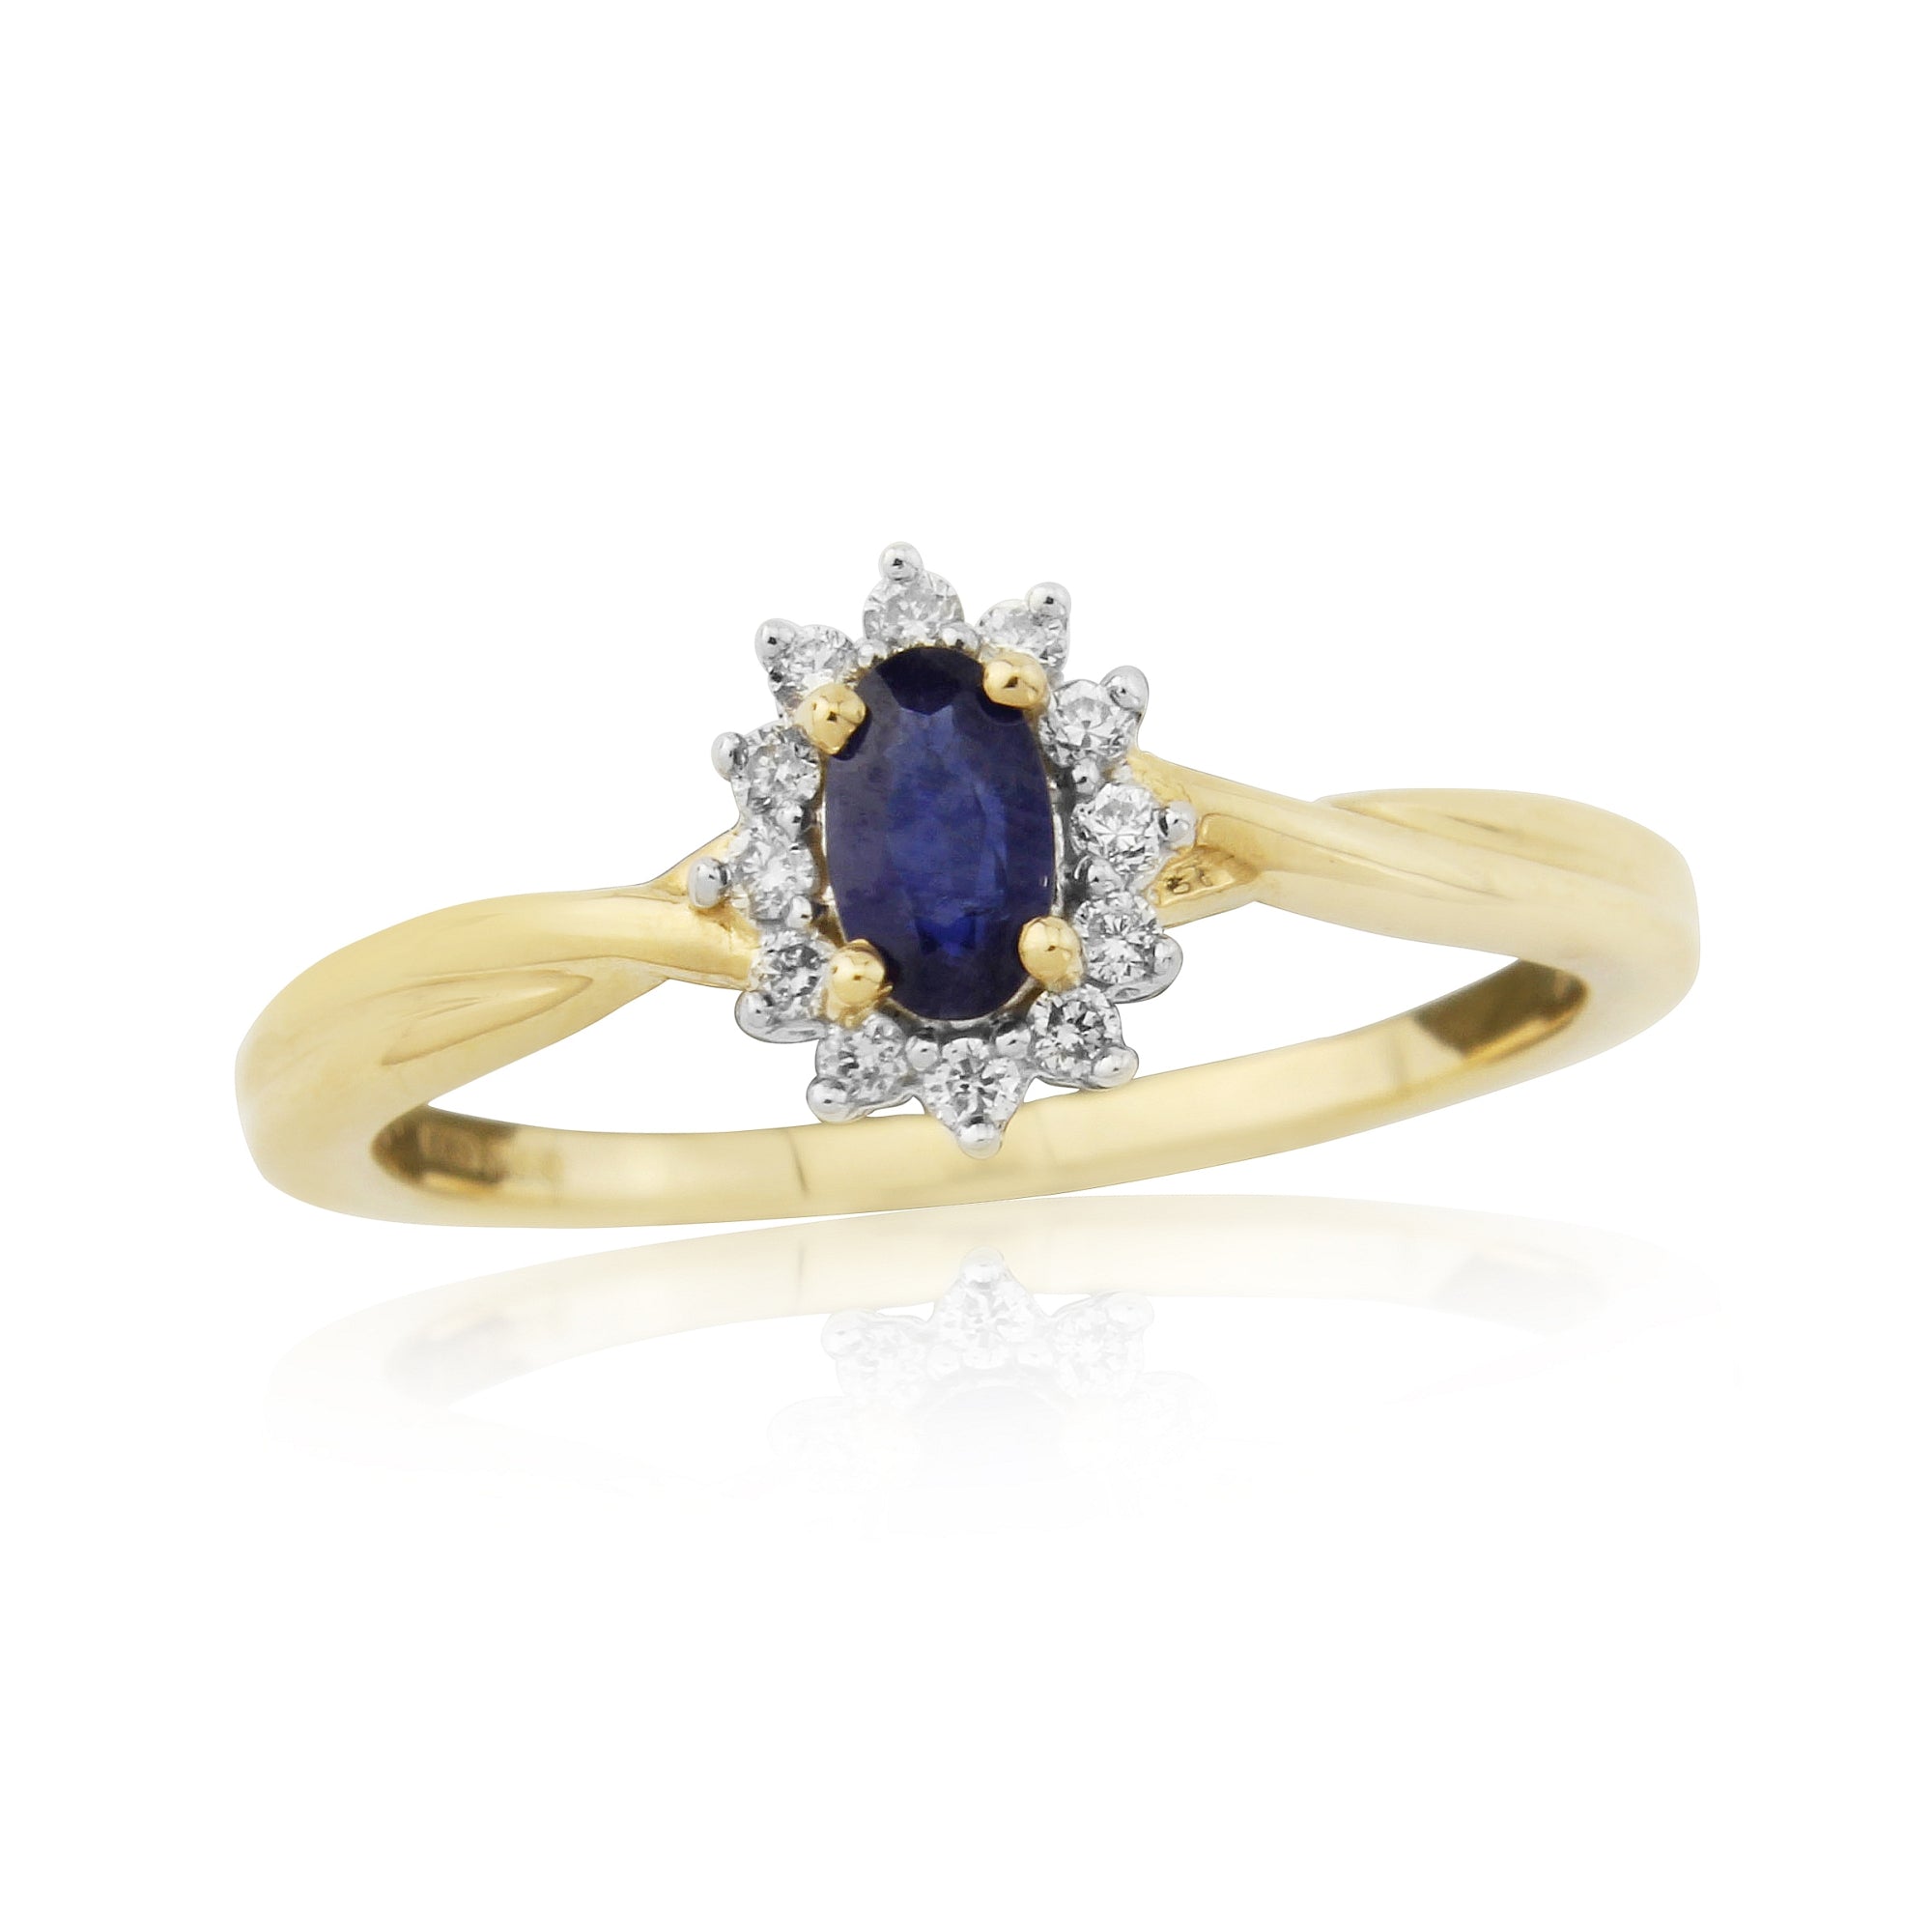 9ct gold 5x3mm oval sapphire & diamond cluster ring with crossover shank 0.11ct